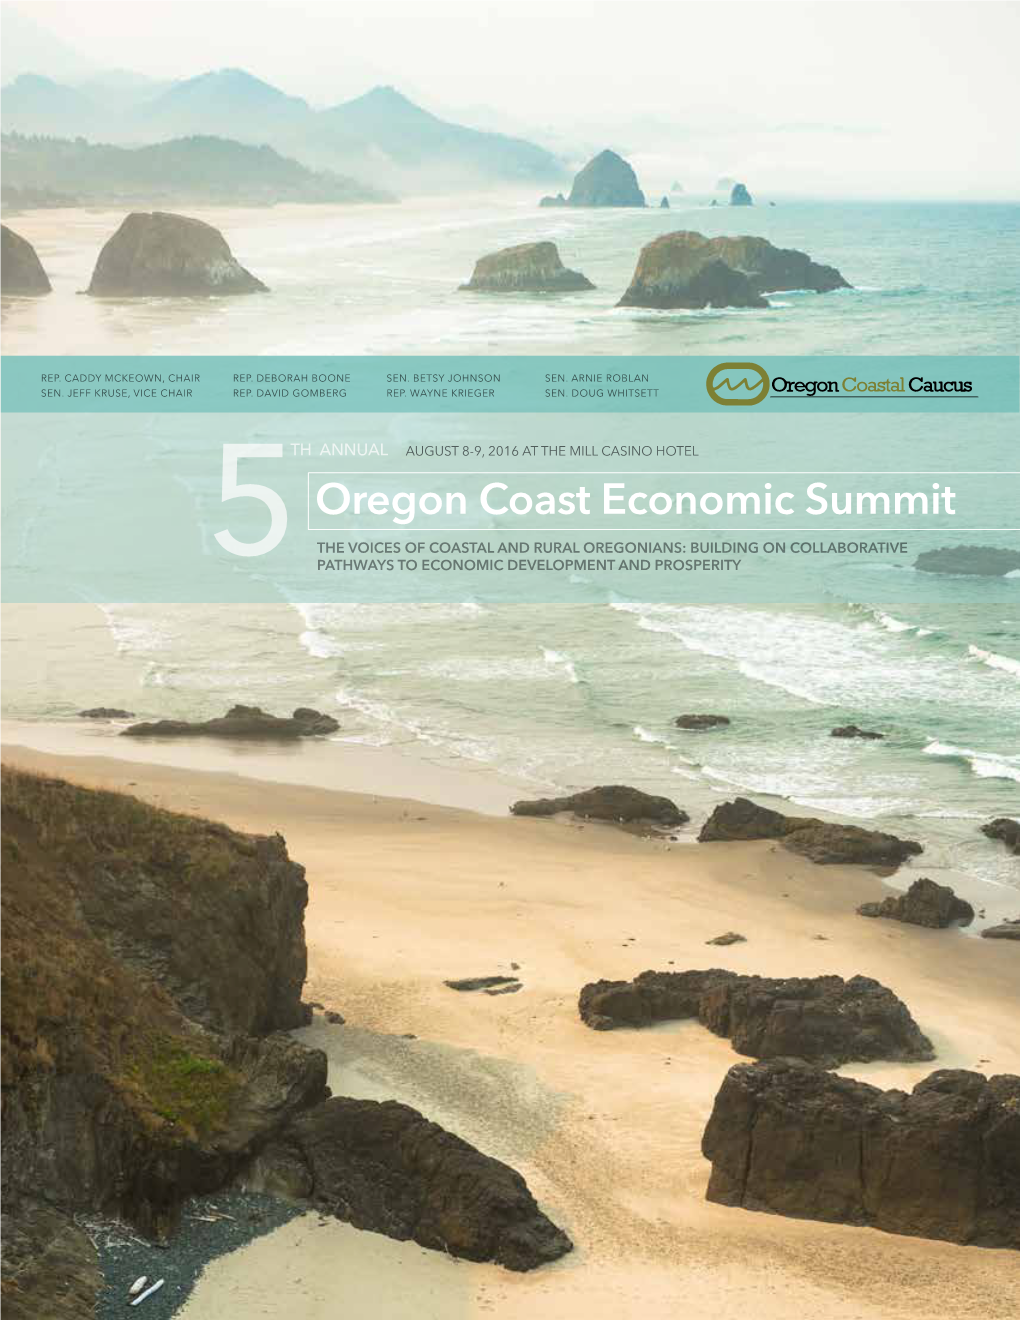 Oregon Coast Economic Summit the VOICES of COASTAL and RURAL OREGONIANS: BUILDING on COLLABORATIVE 5 PATHWAYS to ECONOMIC DEVELOPMENT and PROSPERITY REP